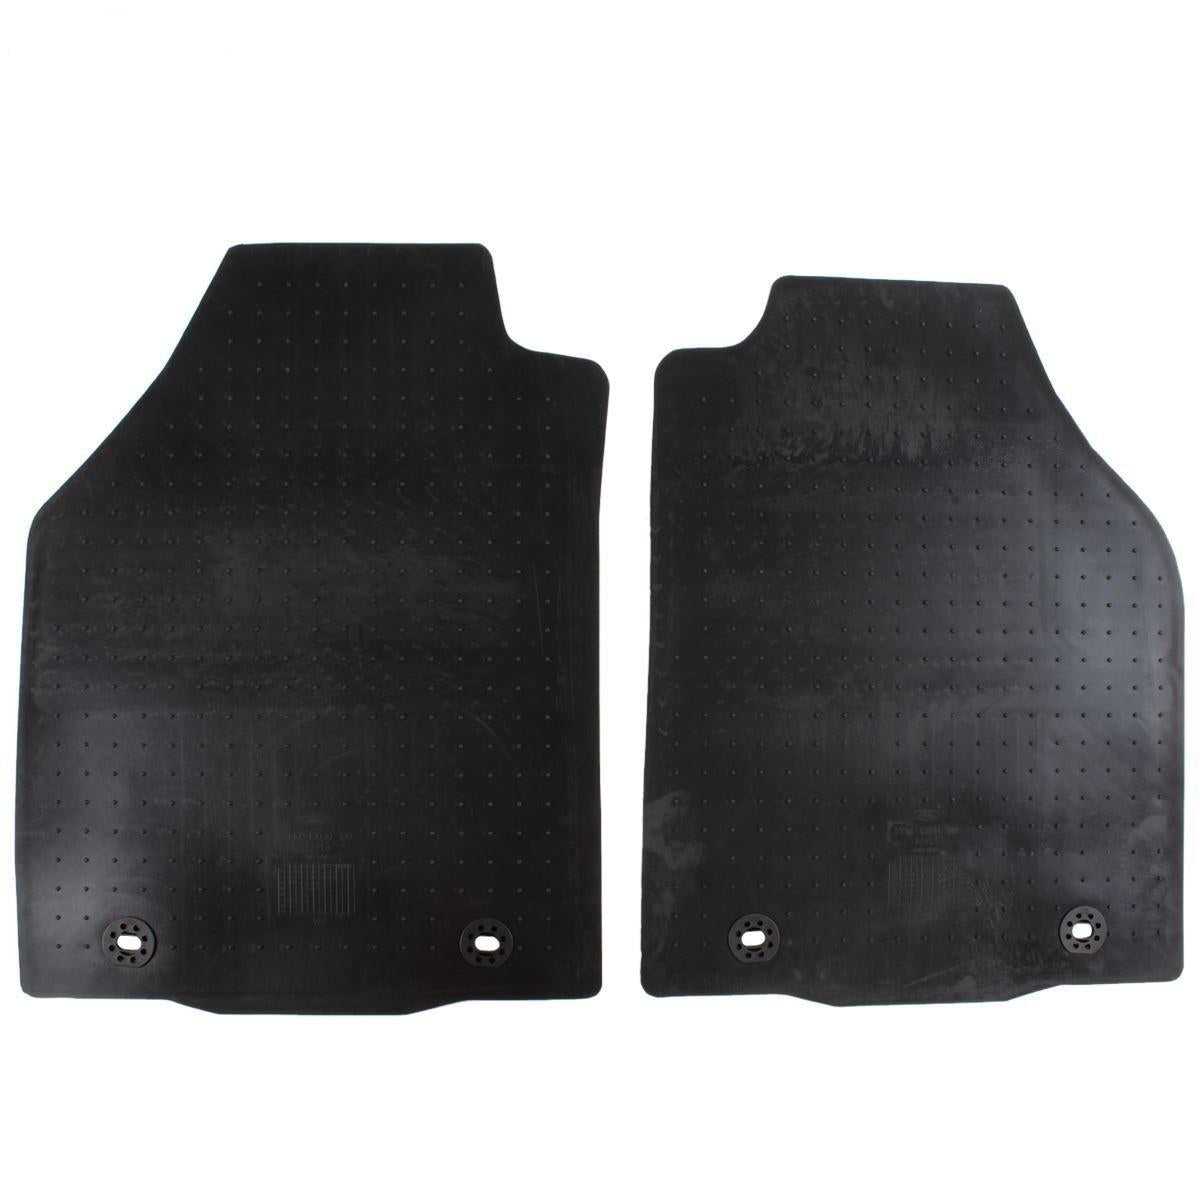 Ford, TRANSIT CONNECT FRONT RUBBER CONTOURED FLOOR MATS 2002-2013